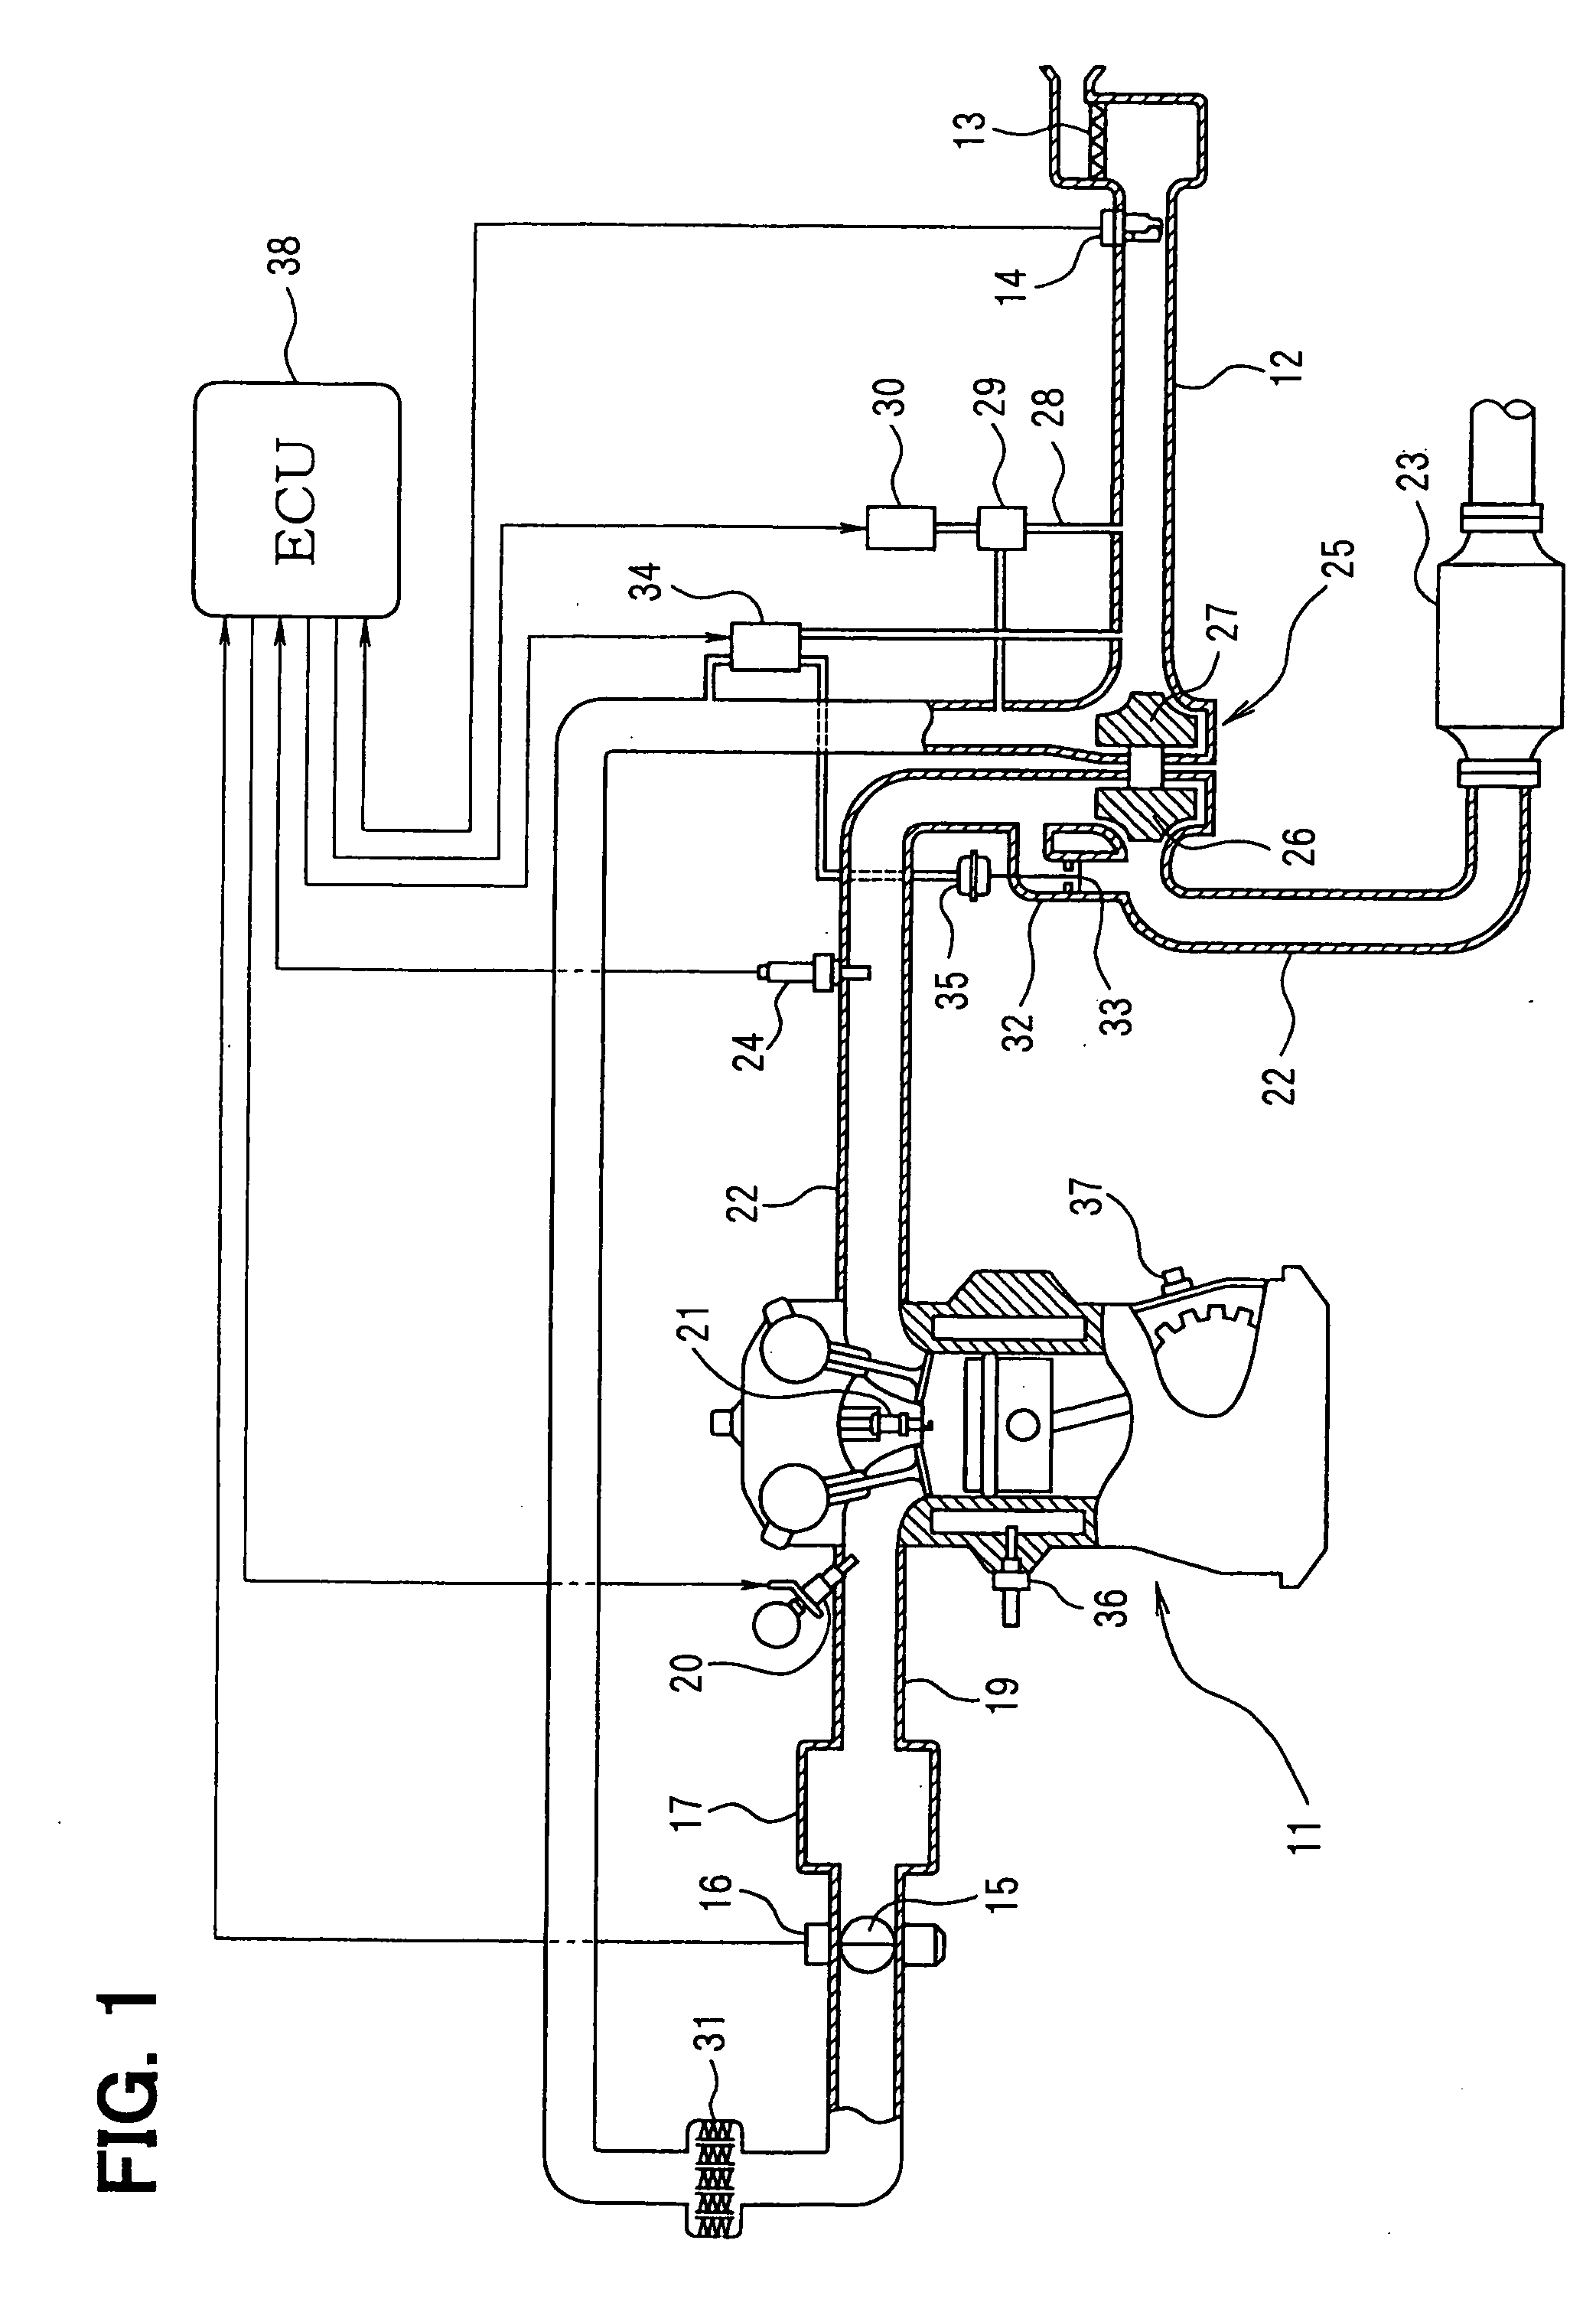 Boost pressure estimation apparatus for internal combustion engine with supercharger